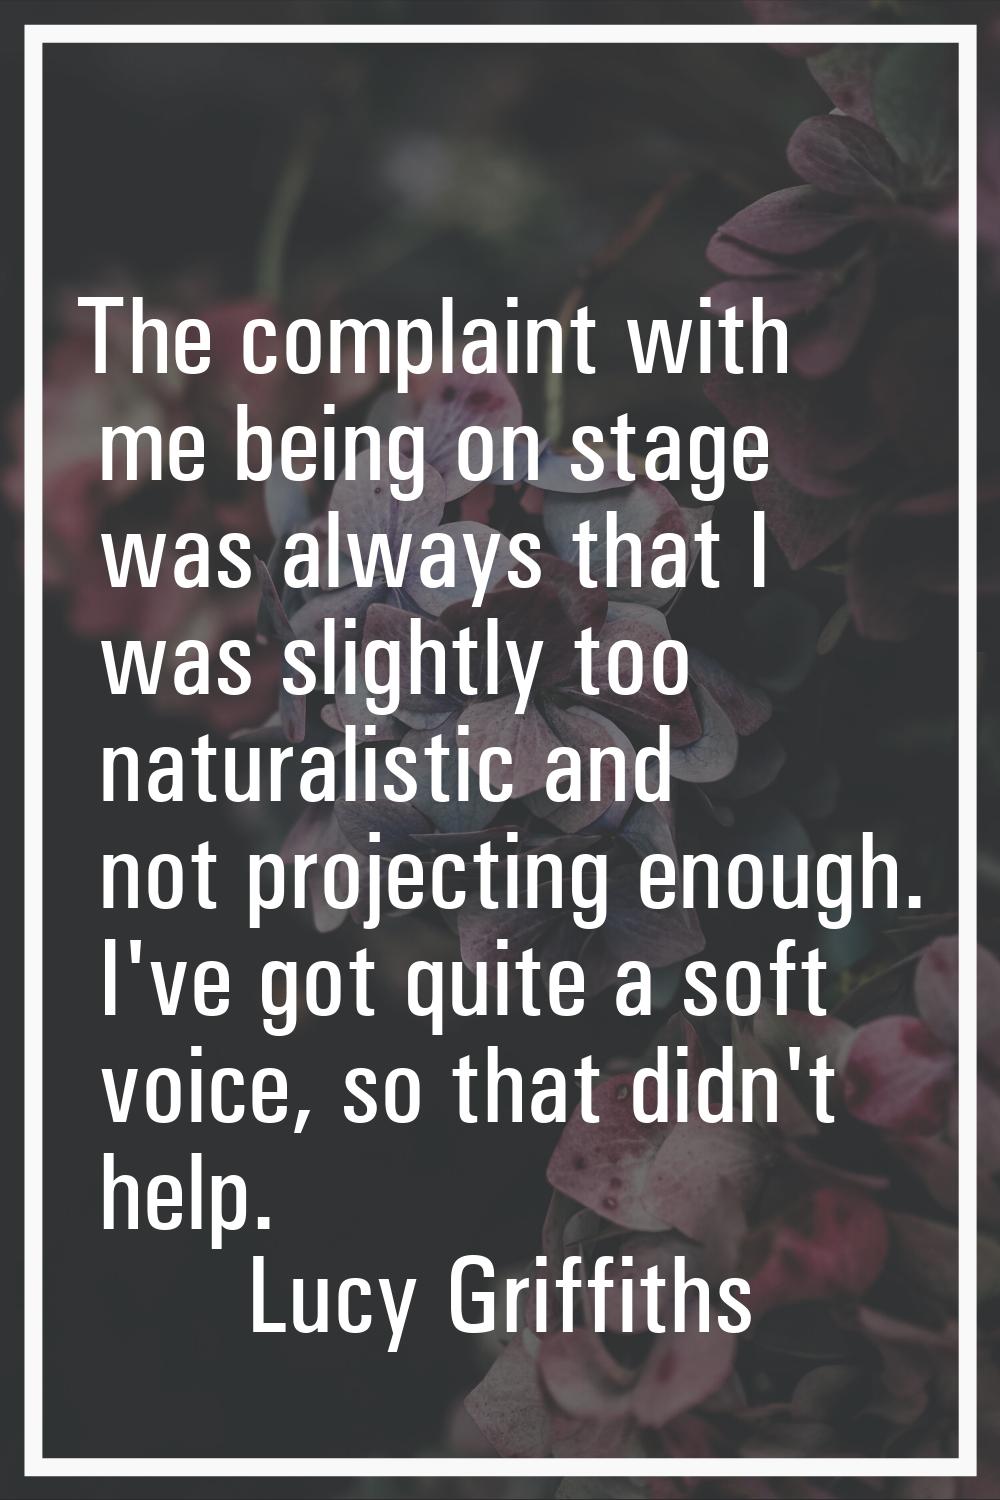 The complaint with me being on stage was always that I was slightly too naturalistic and not projec